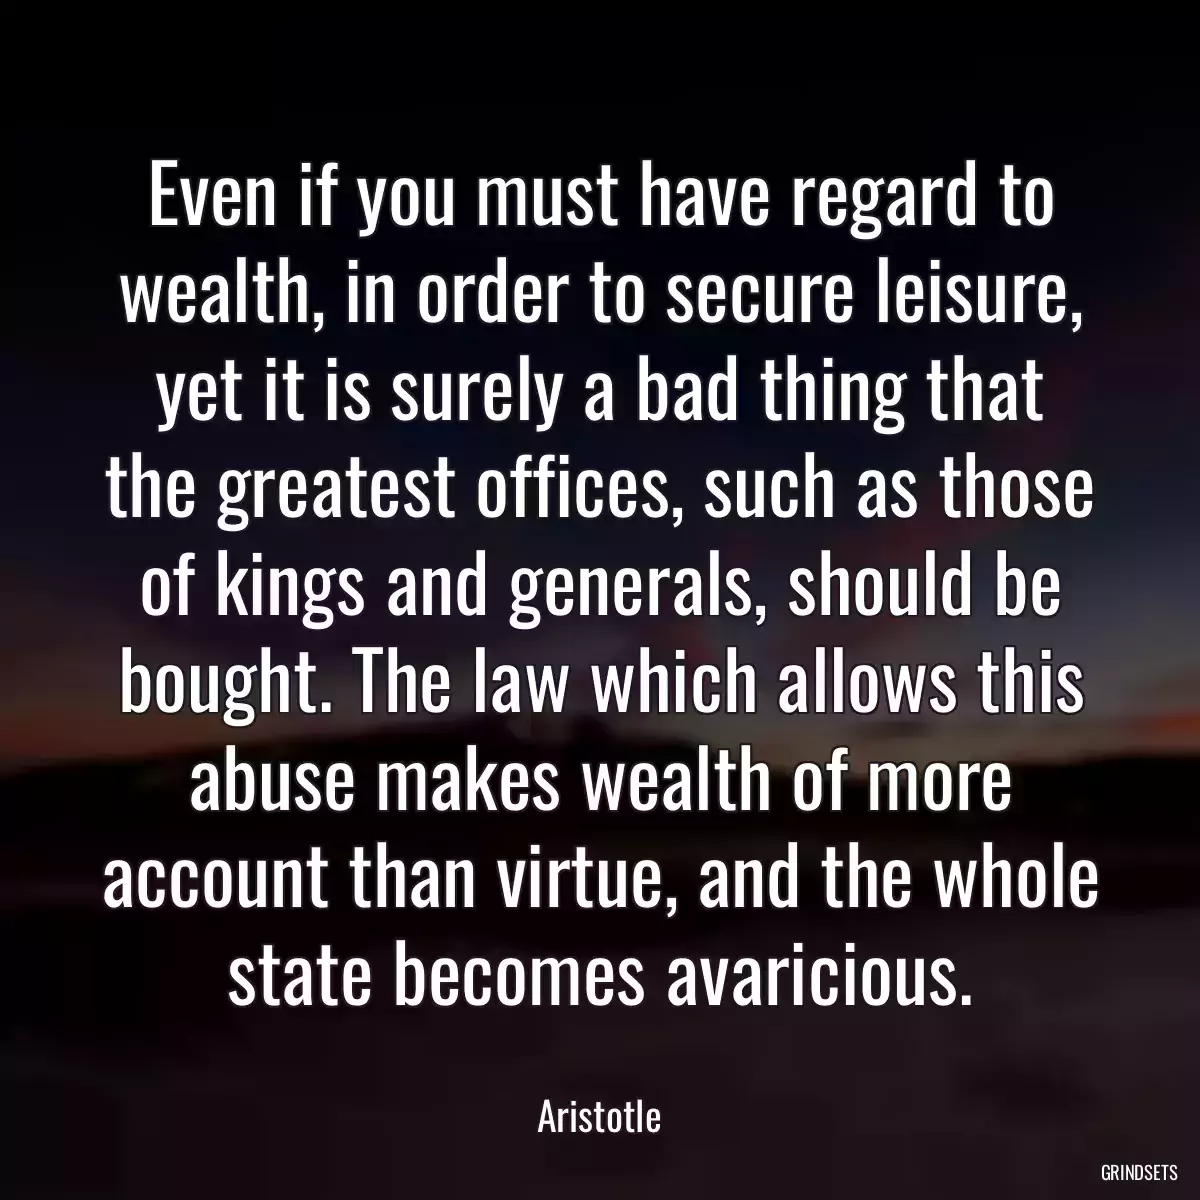 Even if you must have regard to wealth, in order to secure leisure, yet it is surely a bad thing that the greatest offices, such as those of kings and generals, should be bought. The law which allows this abuse makes wealth of more account than virtue, and the whole state becomes avaricious.